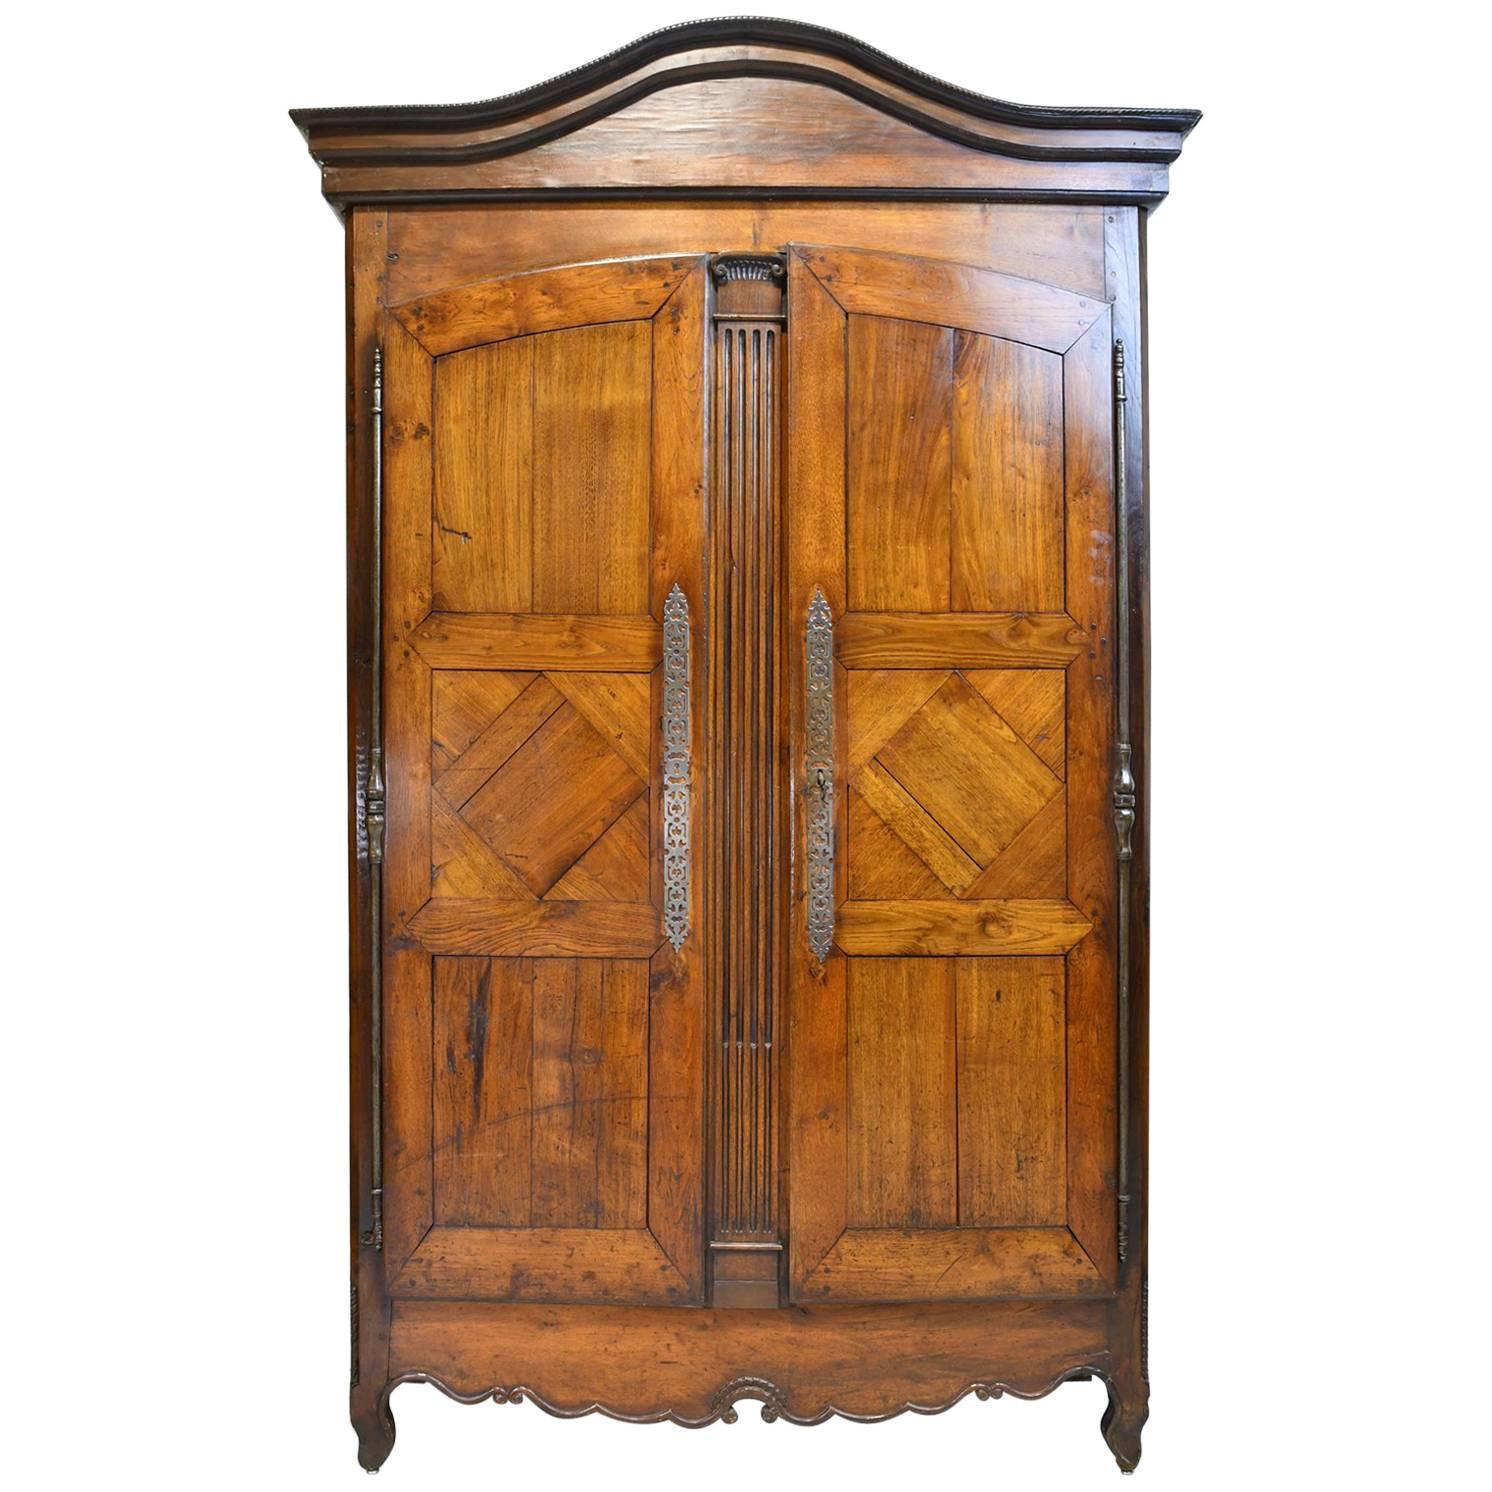 18th Century Country French Armoire in Walnut with Arched Bonnet